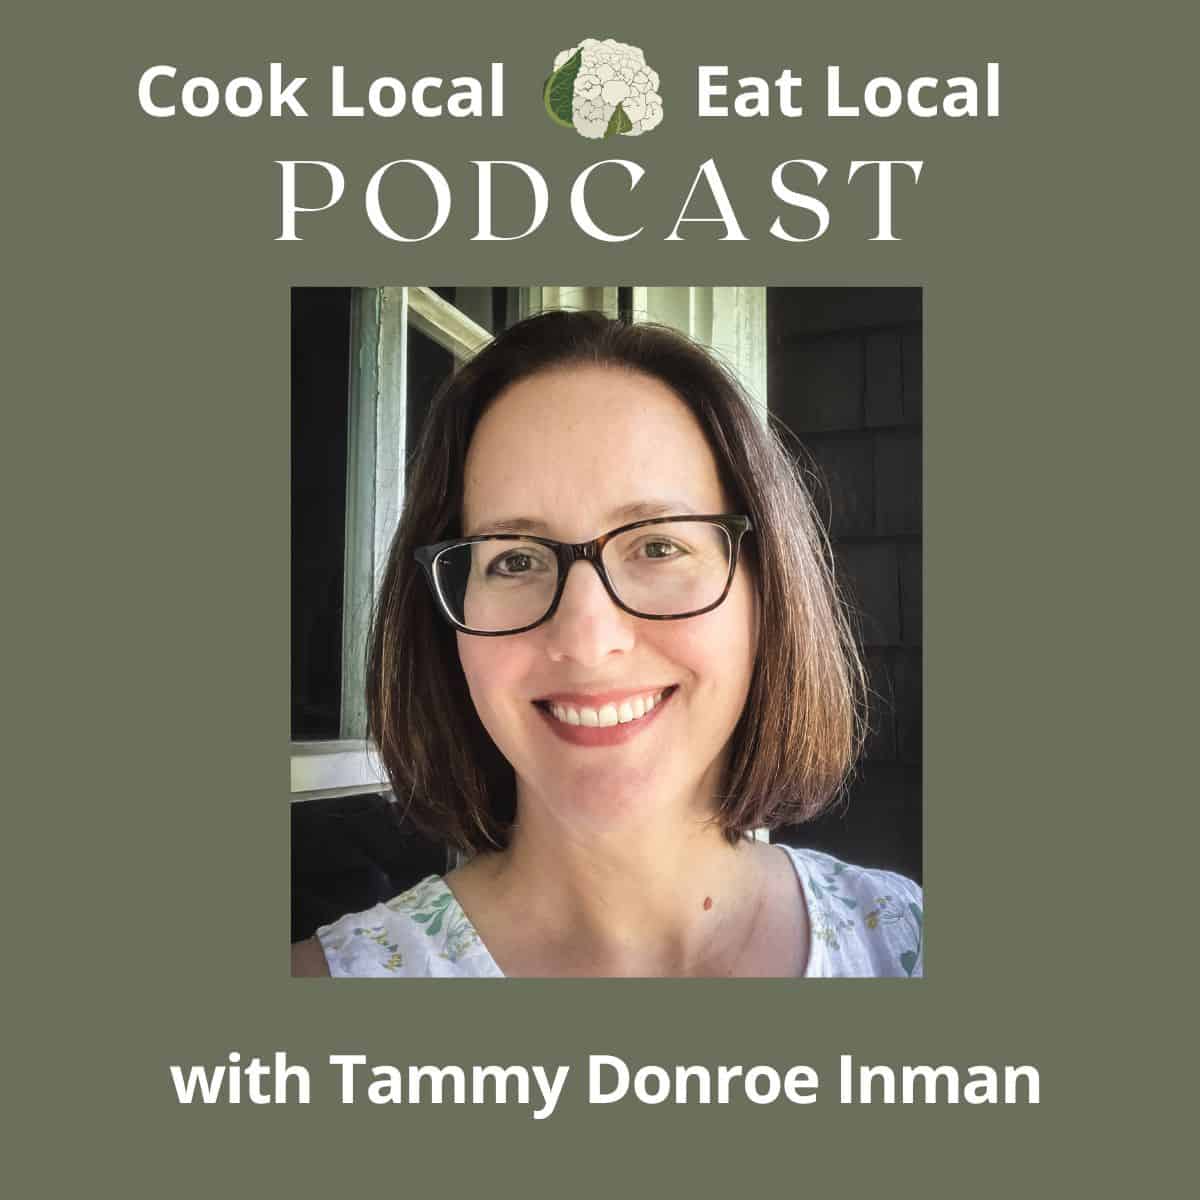 Cook Local Eat Local podcast cover, with a photo of guest, Tammy Donroe Inman.